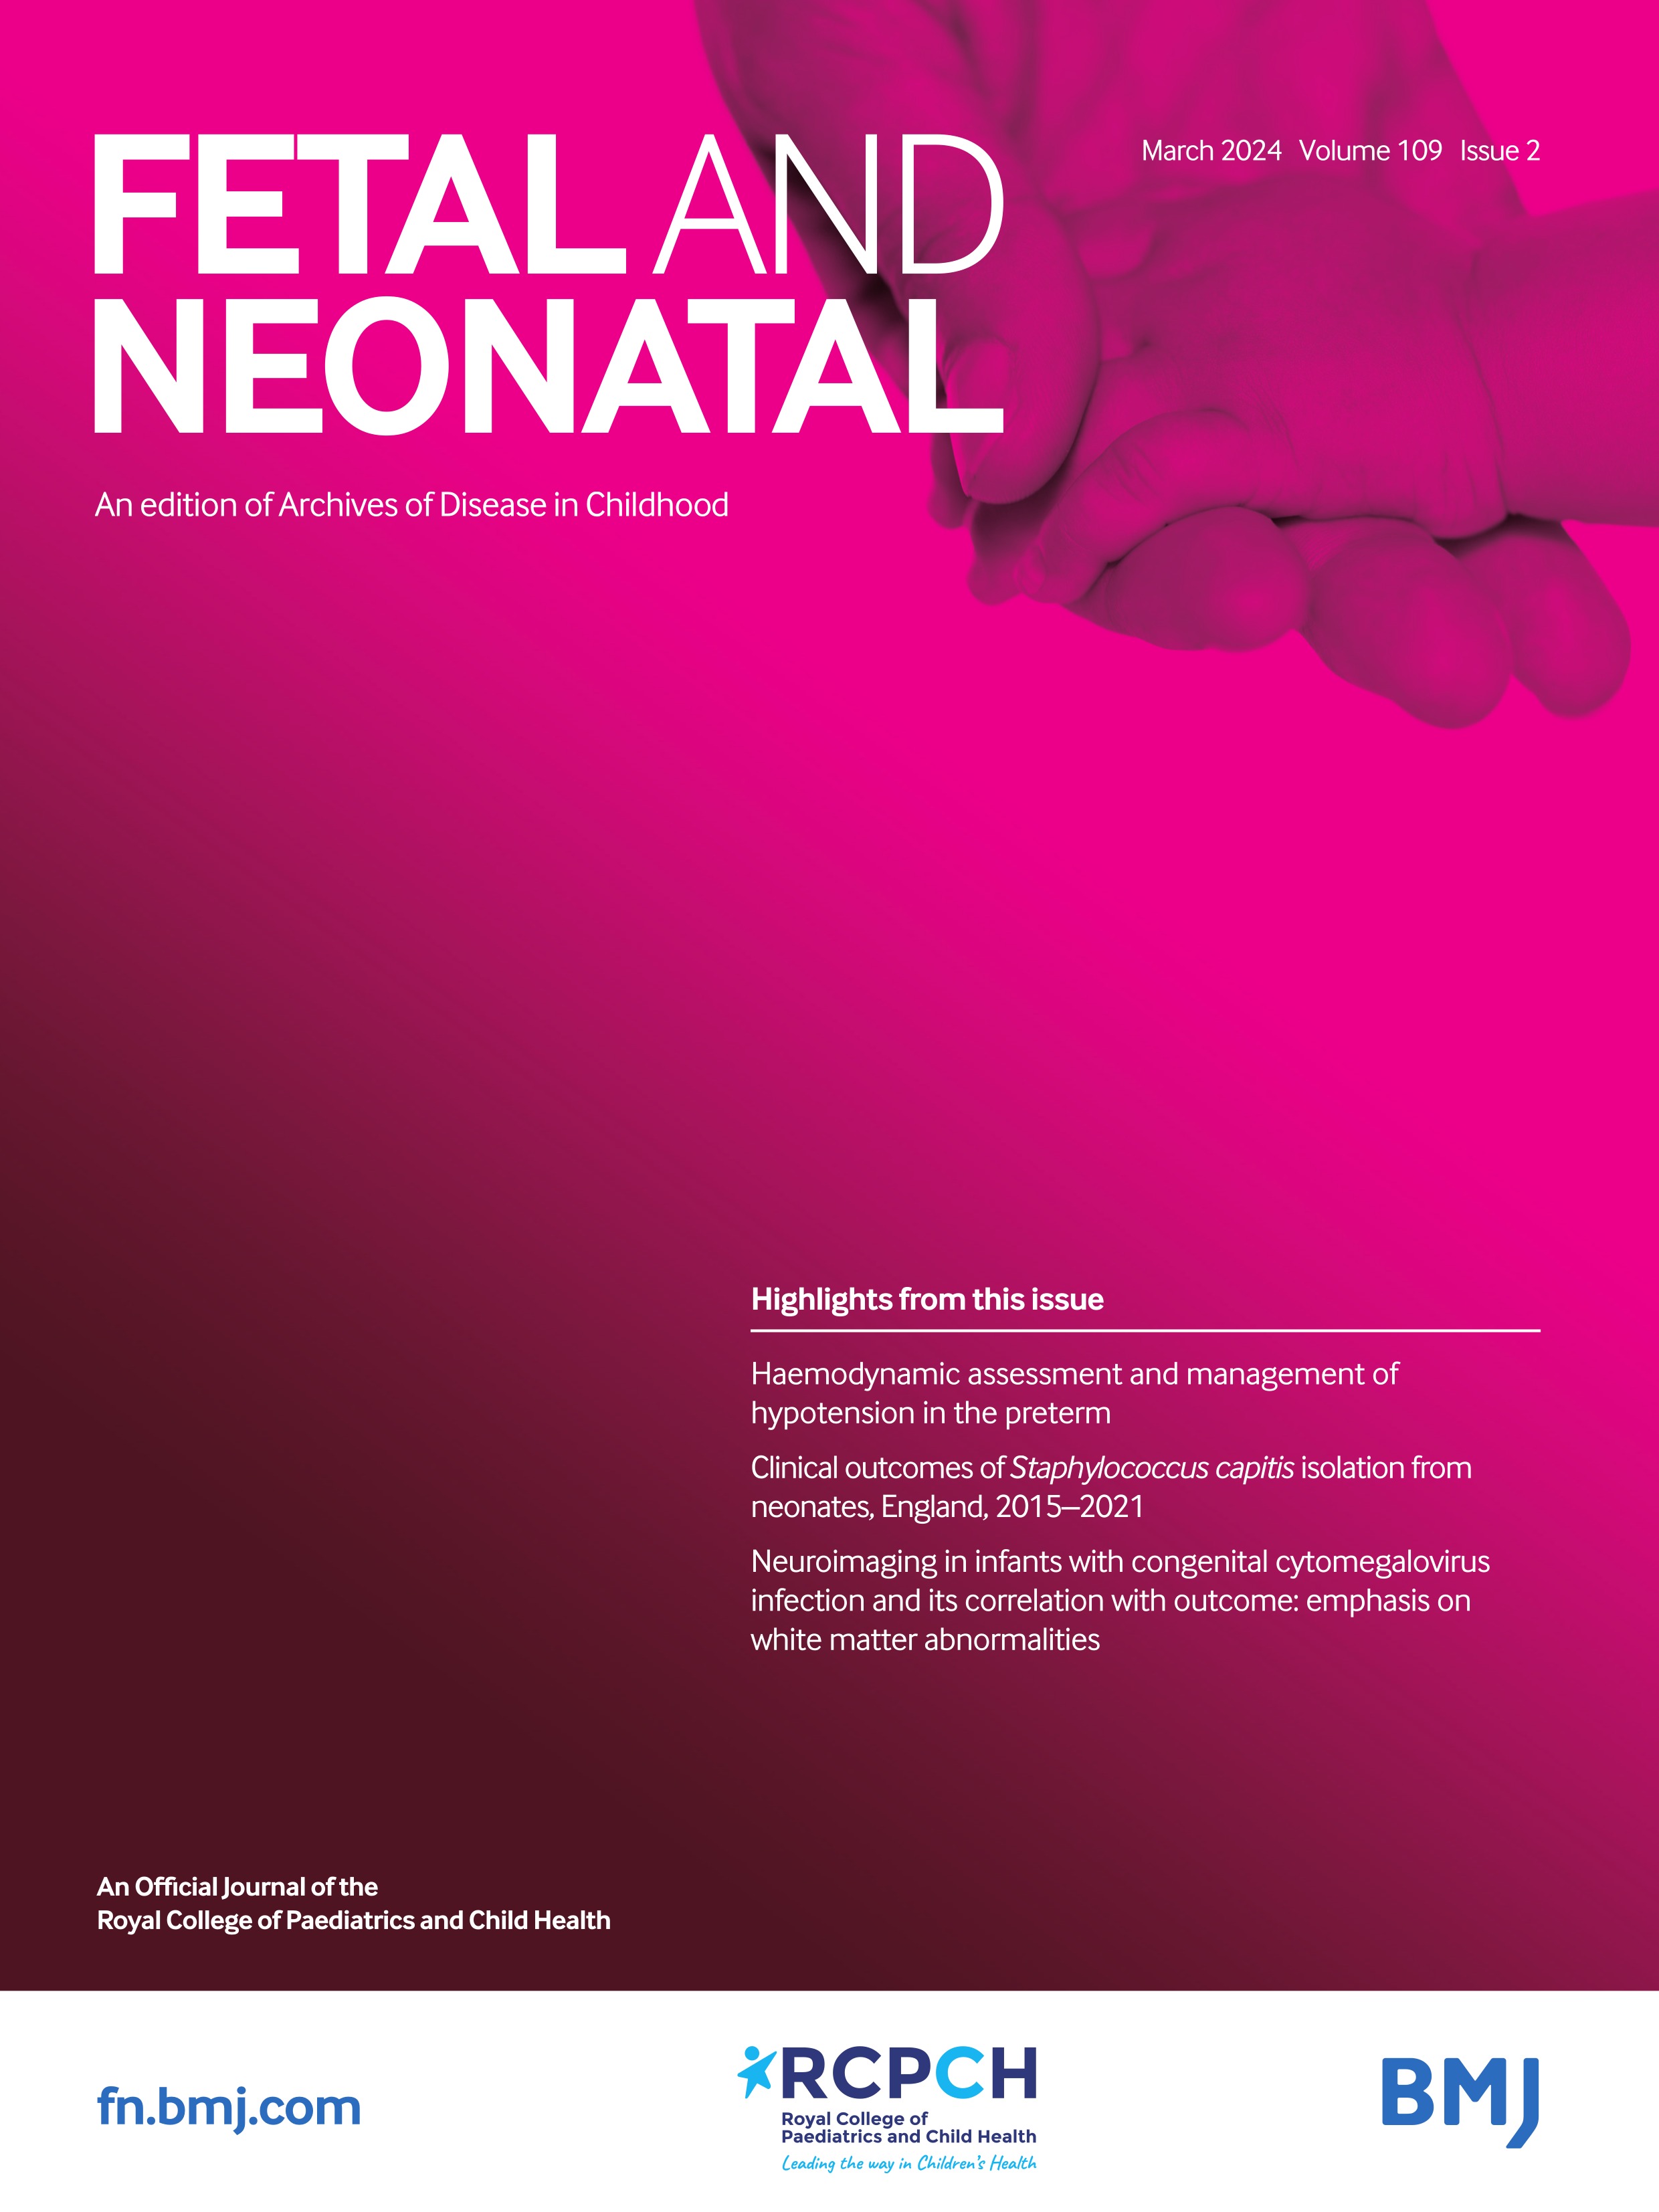 Preliminary results on validity and reliability from two prospective cohort studies on a new Neonatal Coma Score